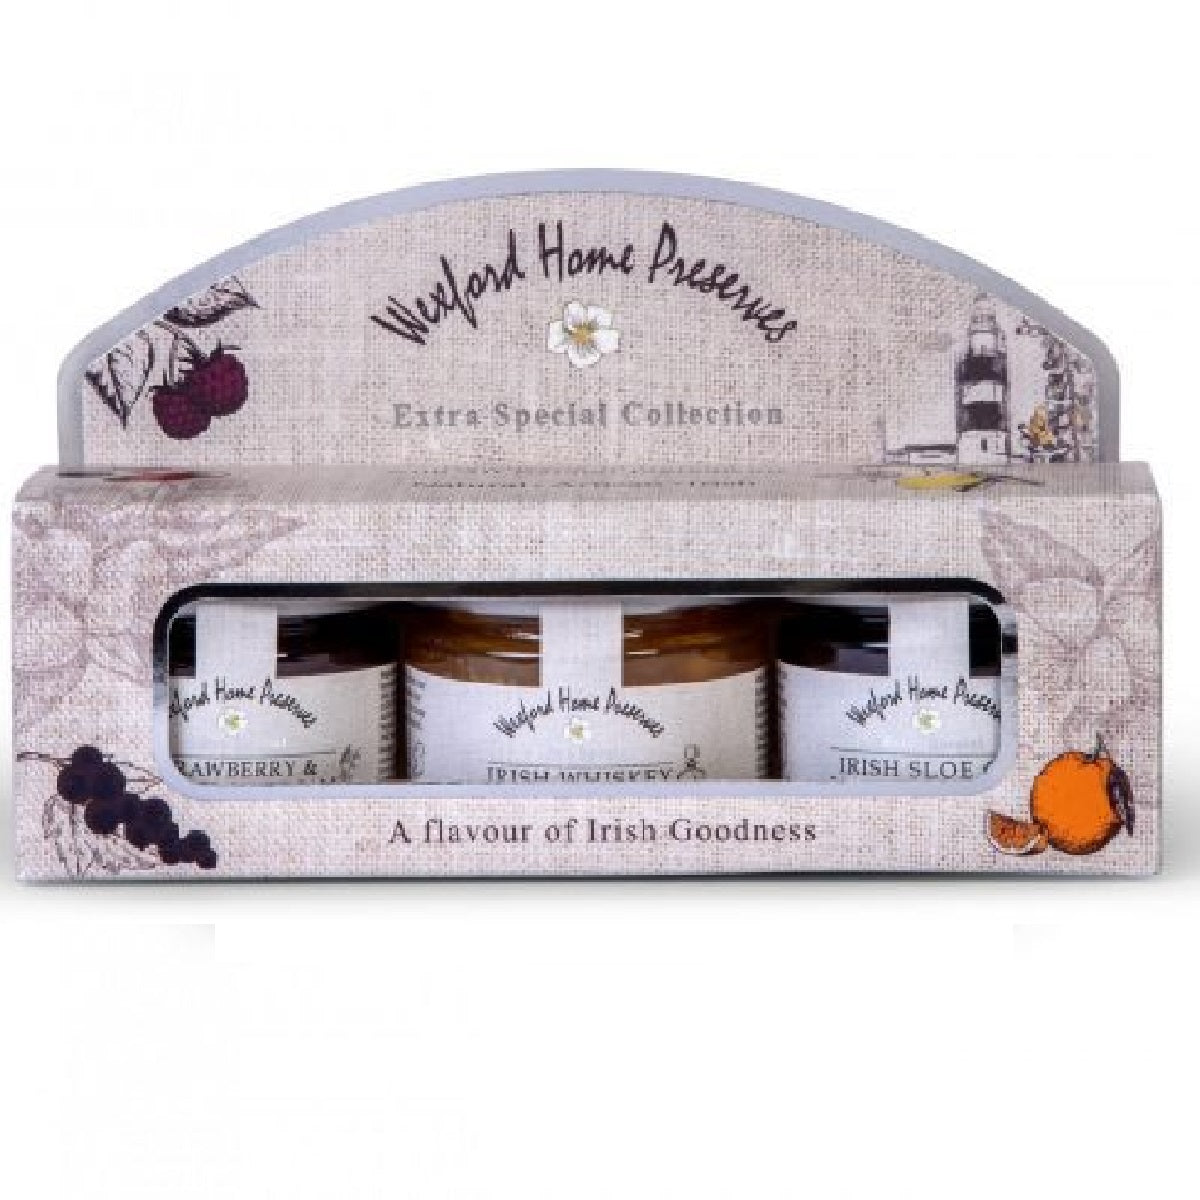 Wexford Home Preserves Extra Special Collection 3 x 100g